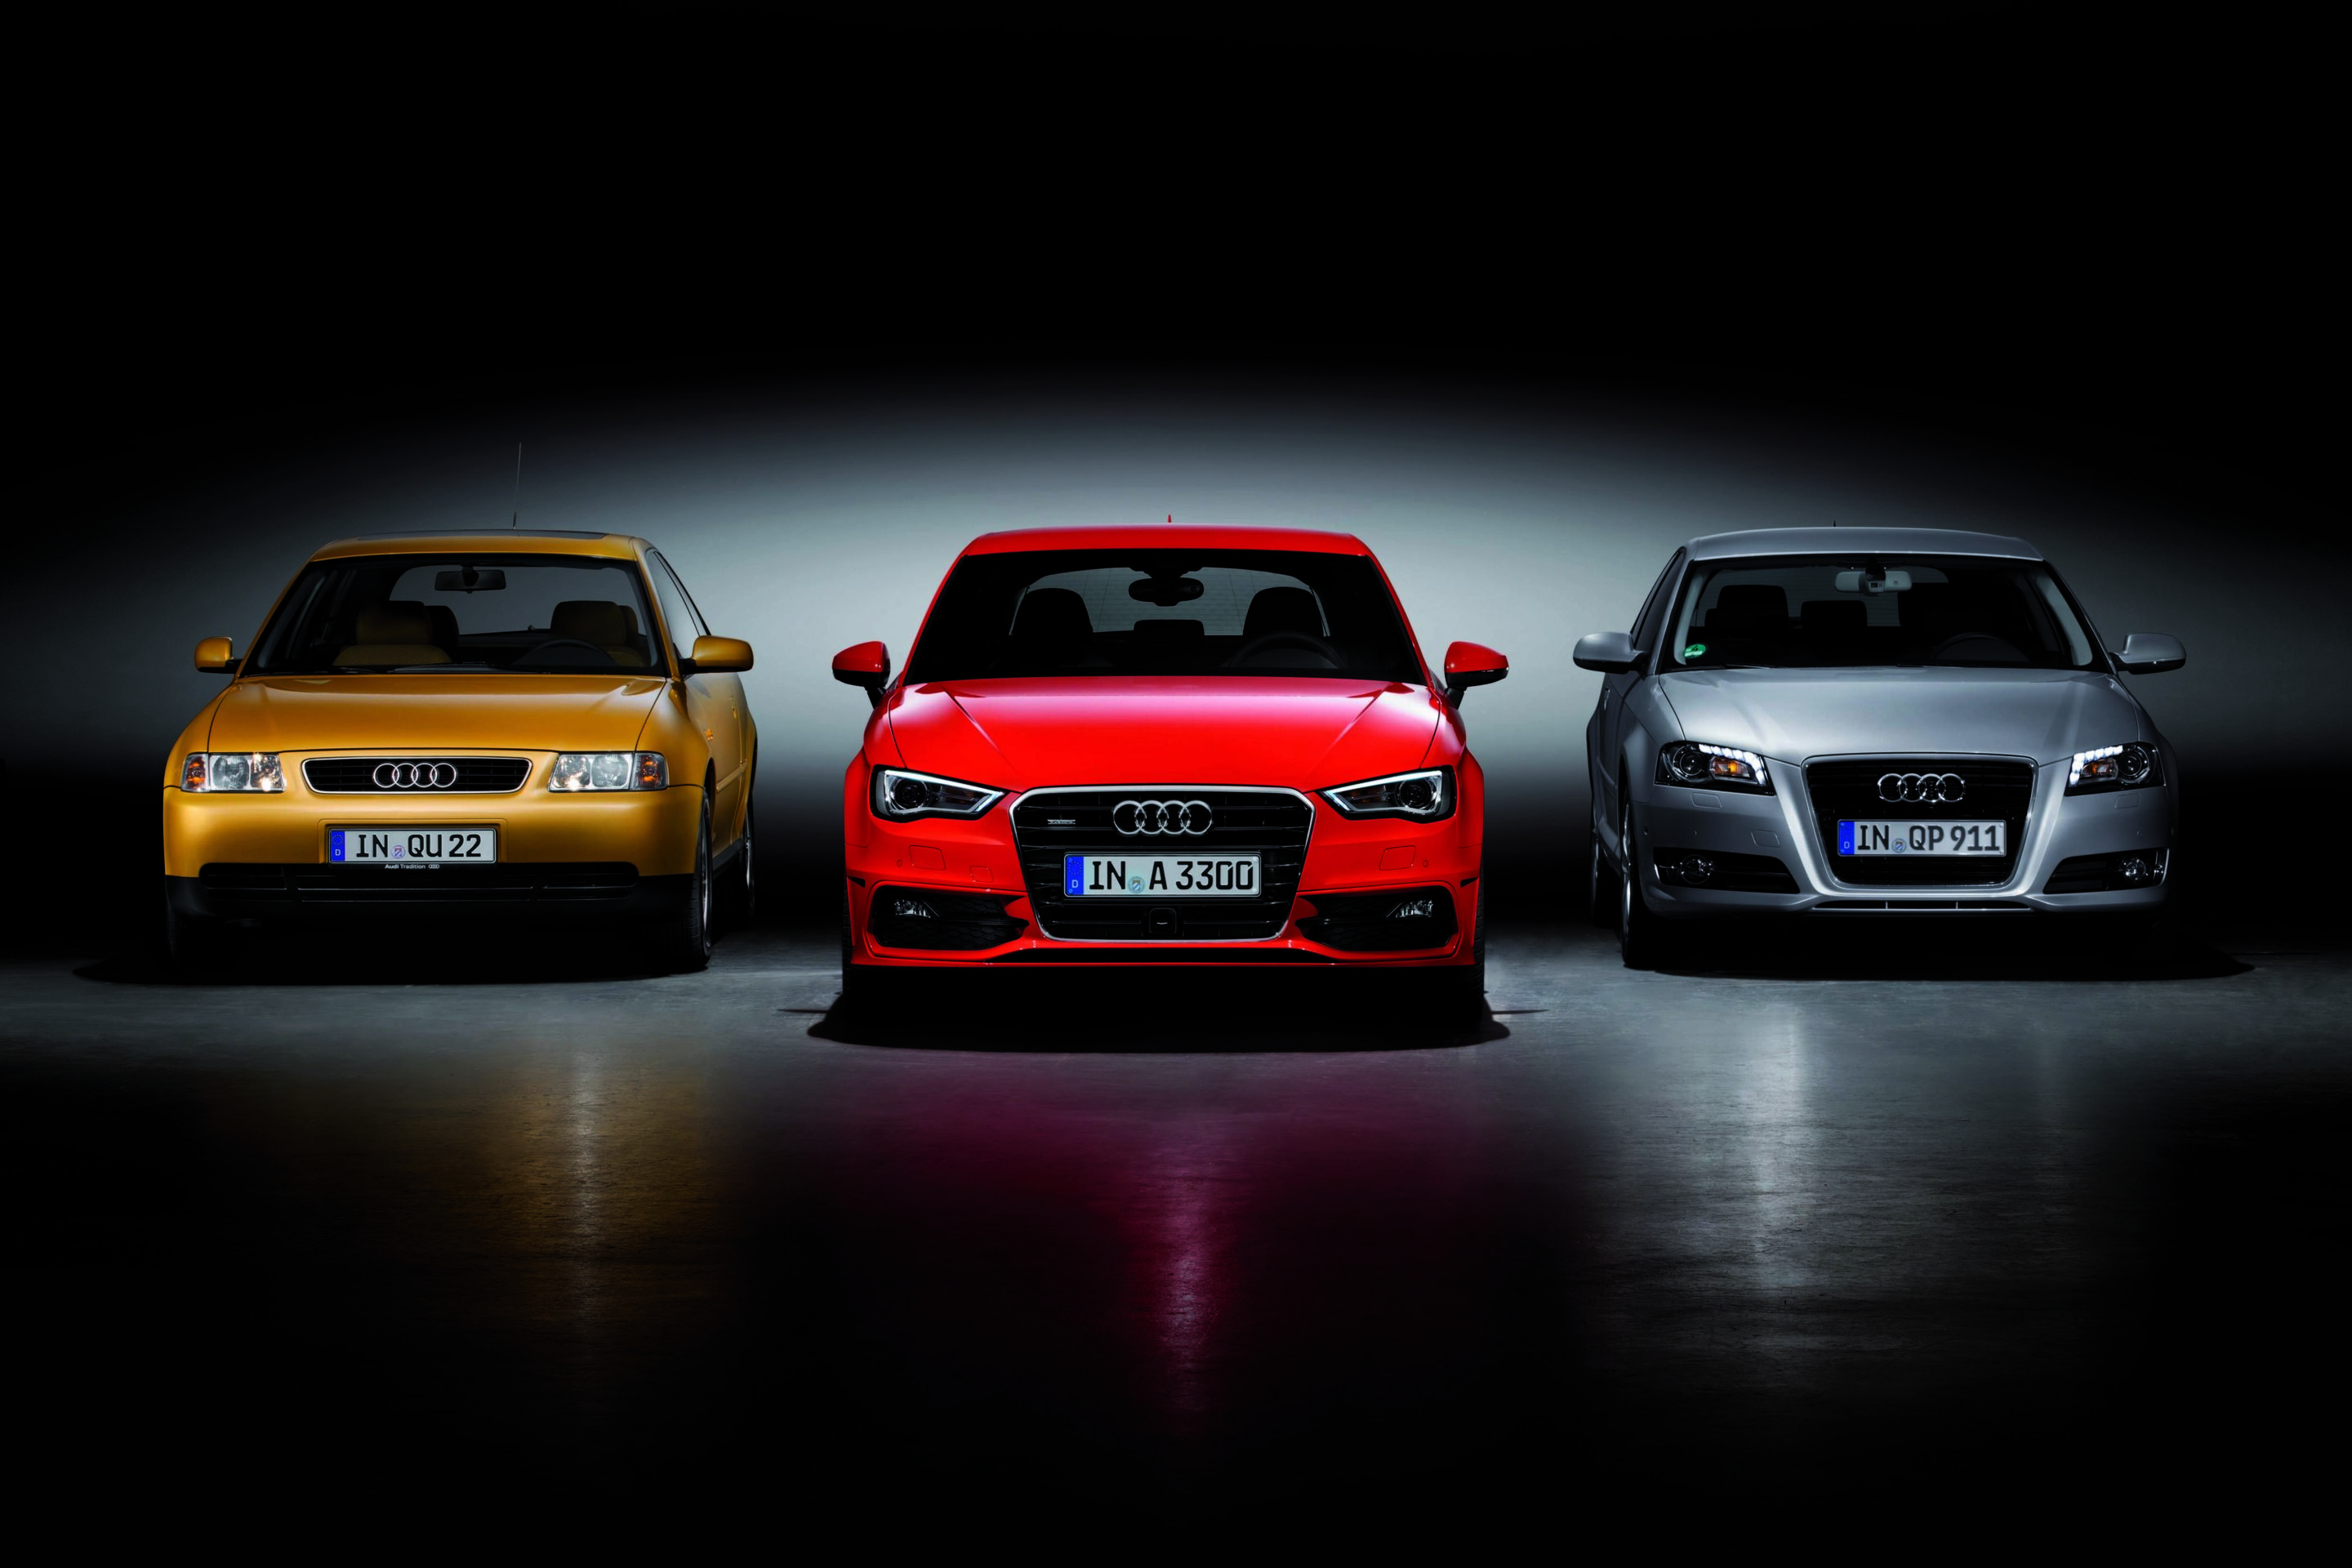 Three generations of the Audi A3